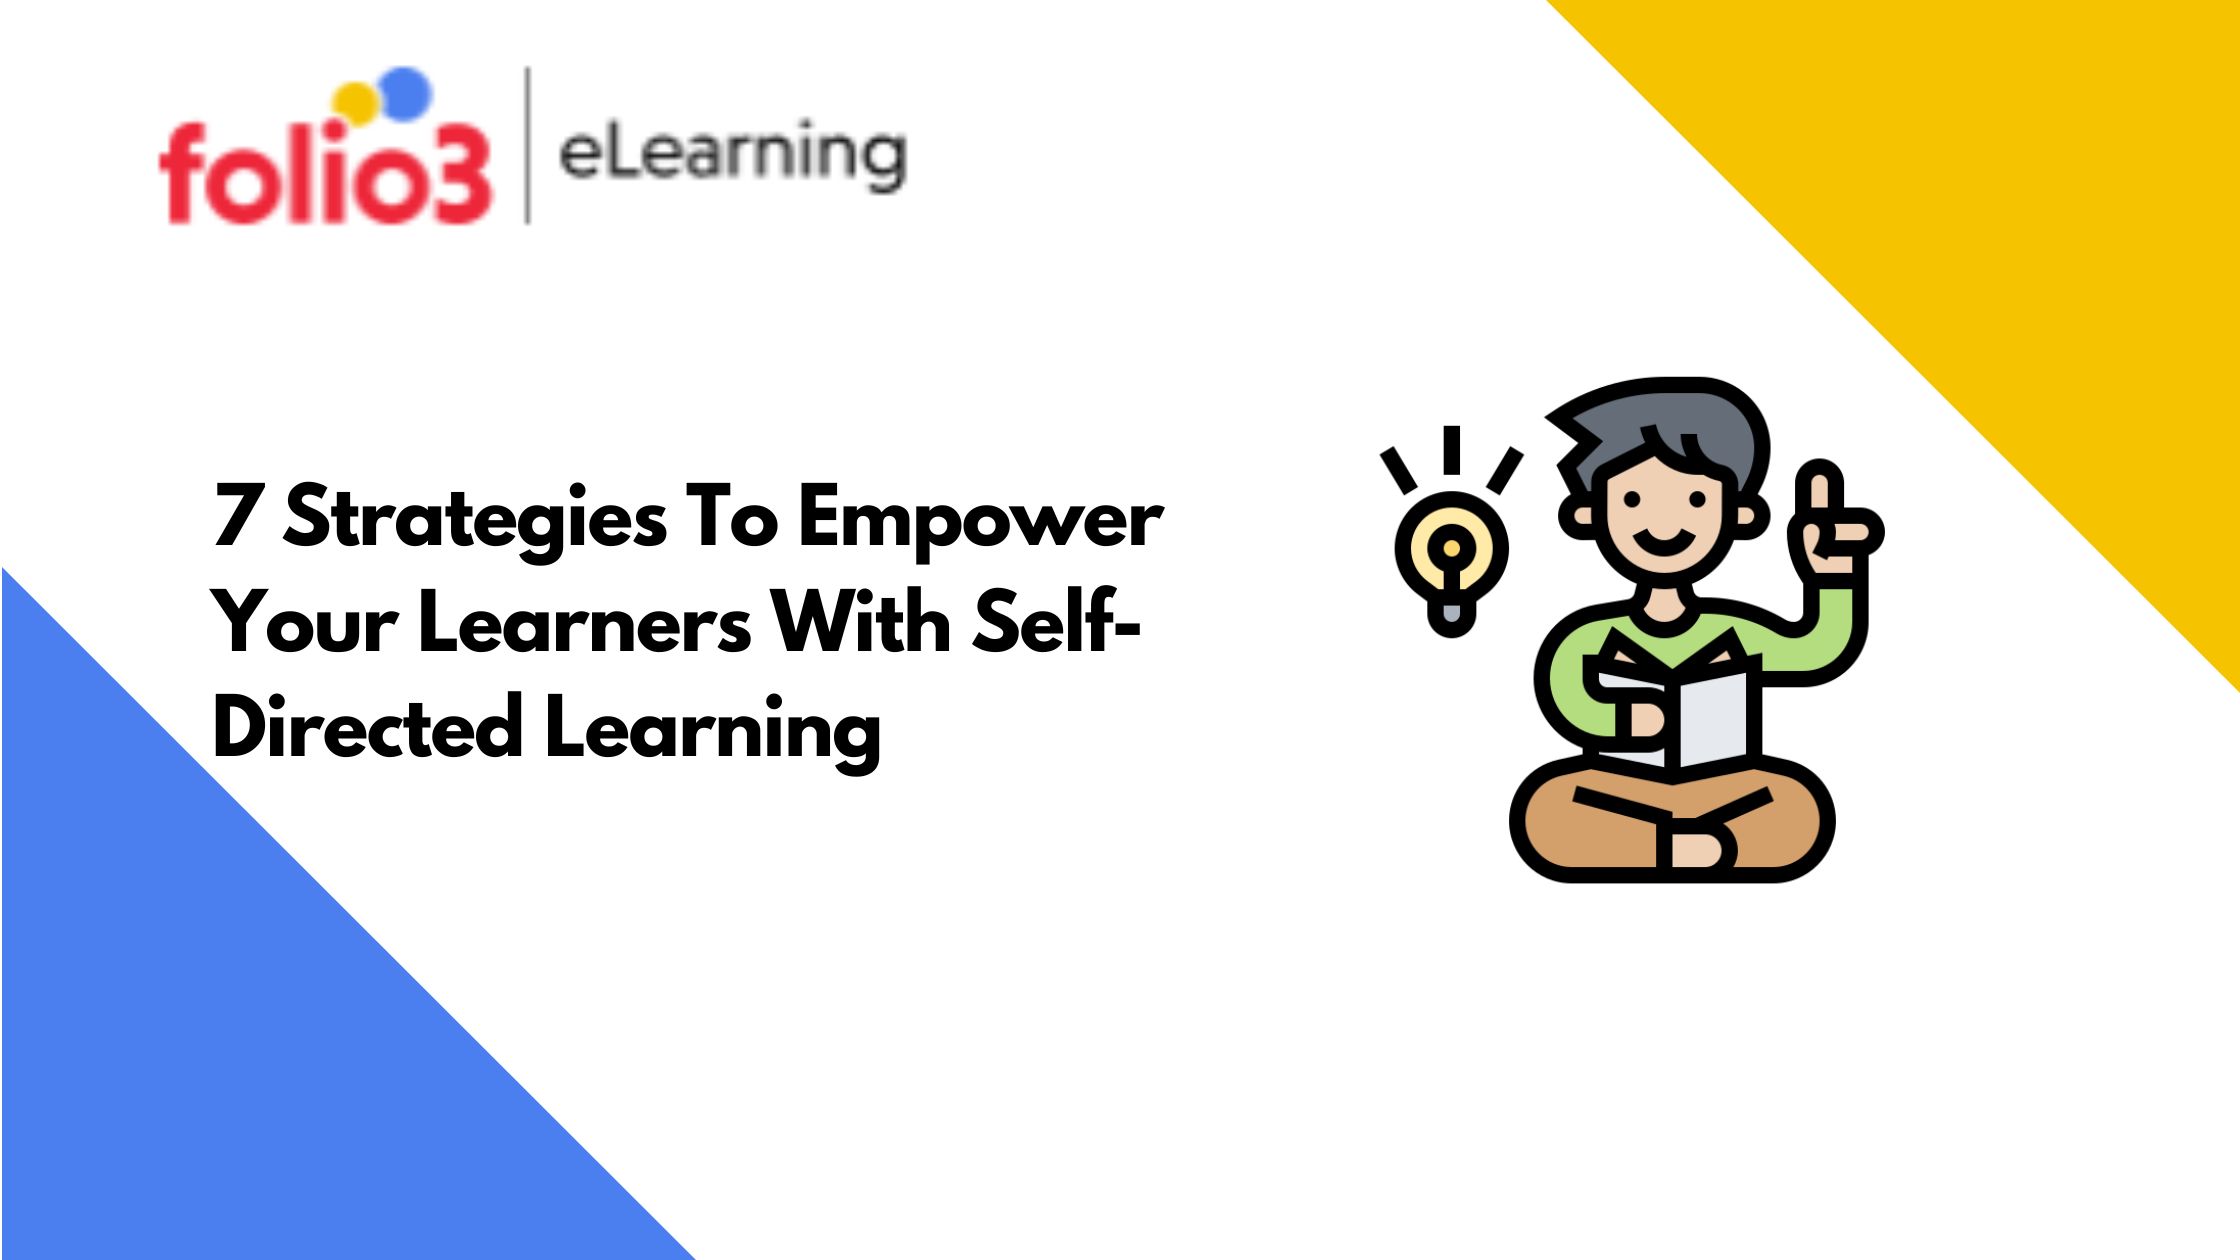 How To Drive Learner Engagement With Video Learning In L&D - eLearning  Industry